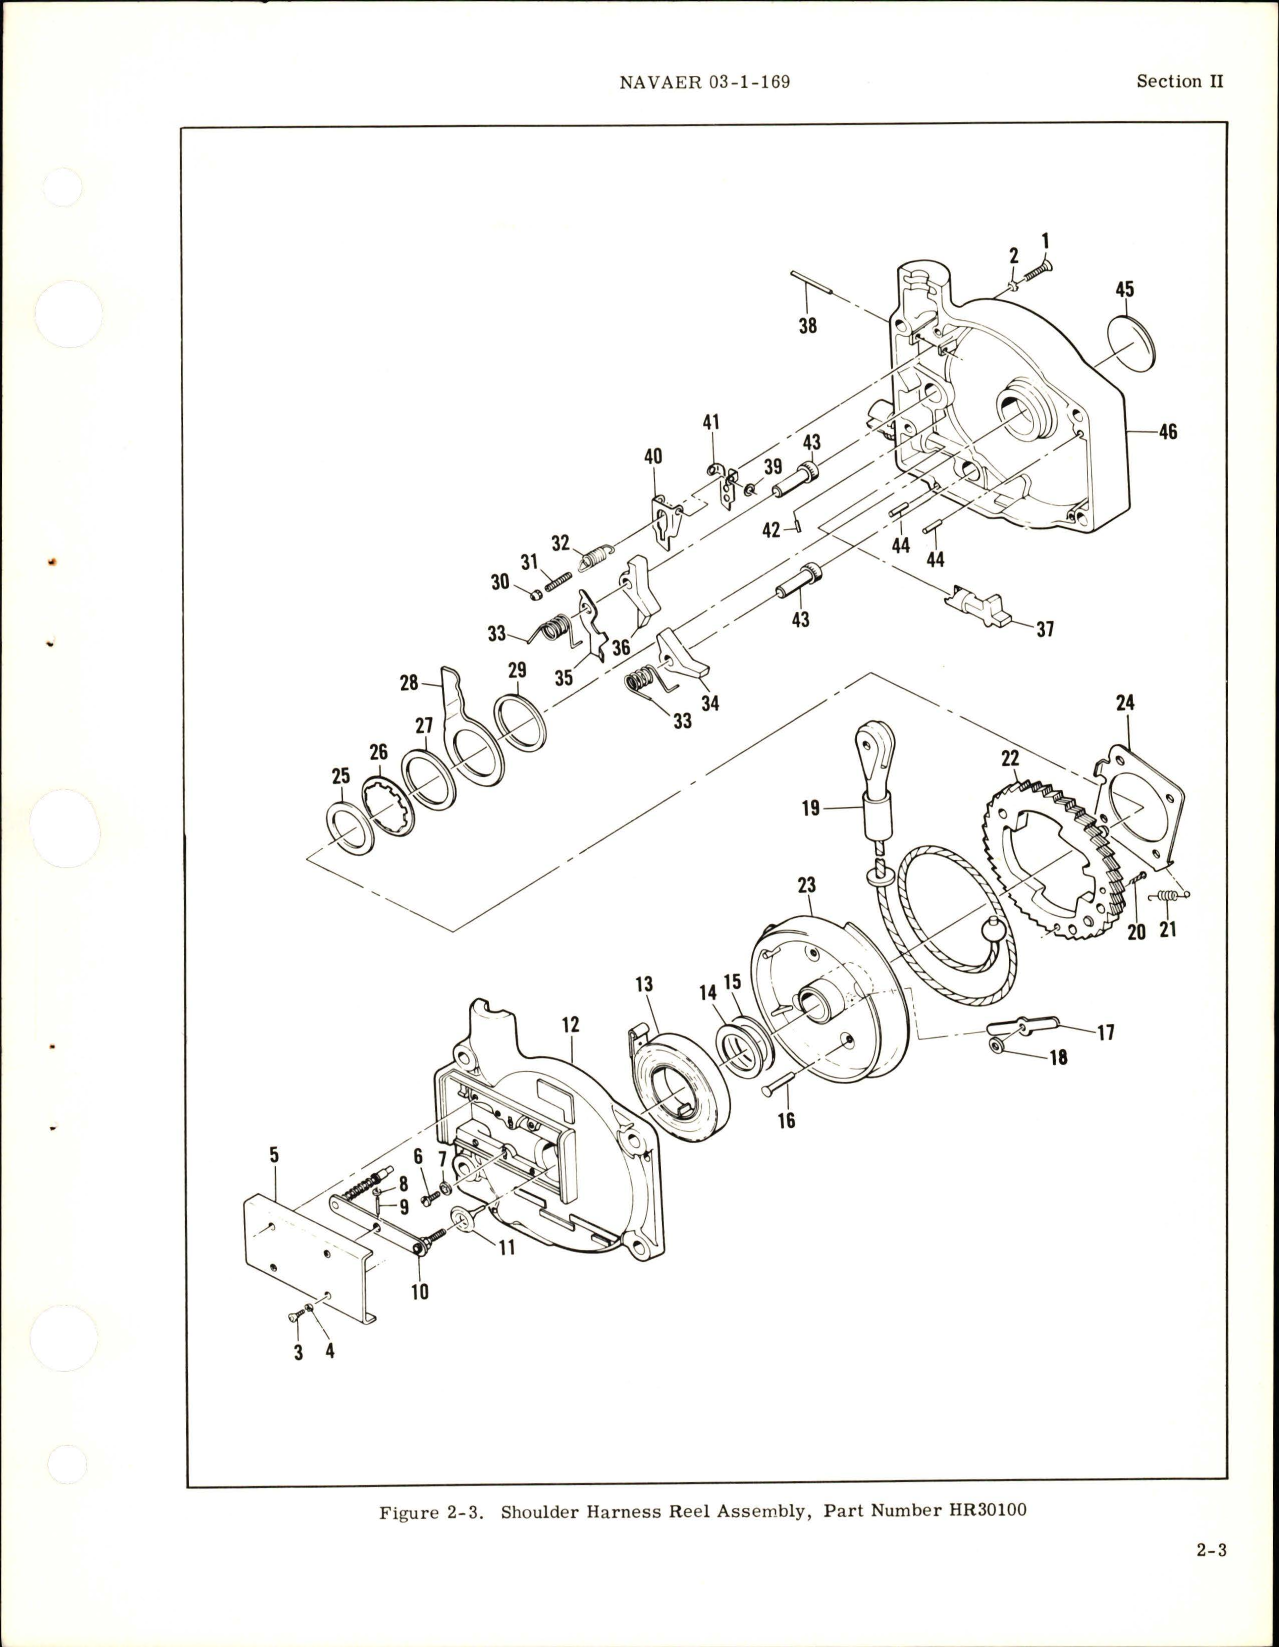 Sample page 9 from AirCorps Library document: Overhaul Instructions for Shoulder Harness Take-Up Reels